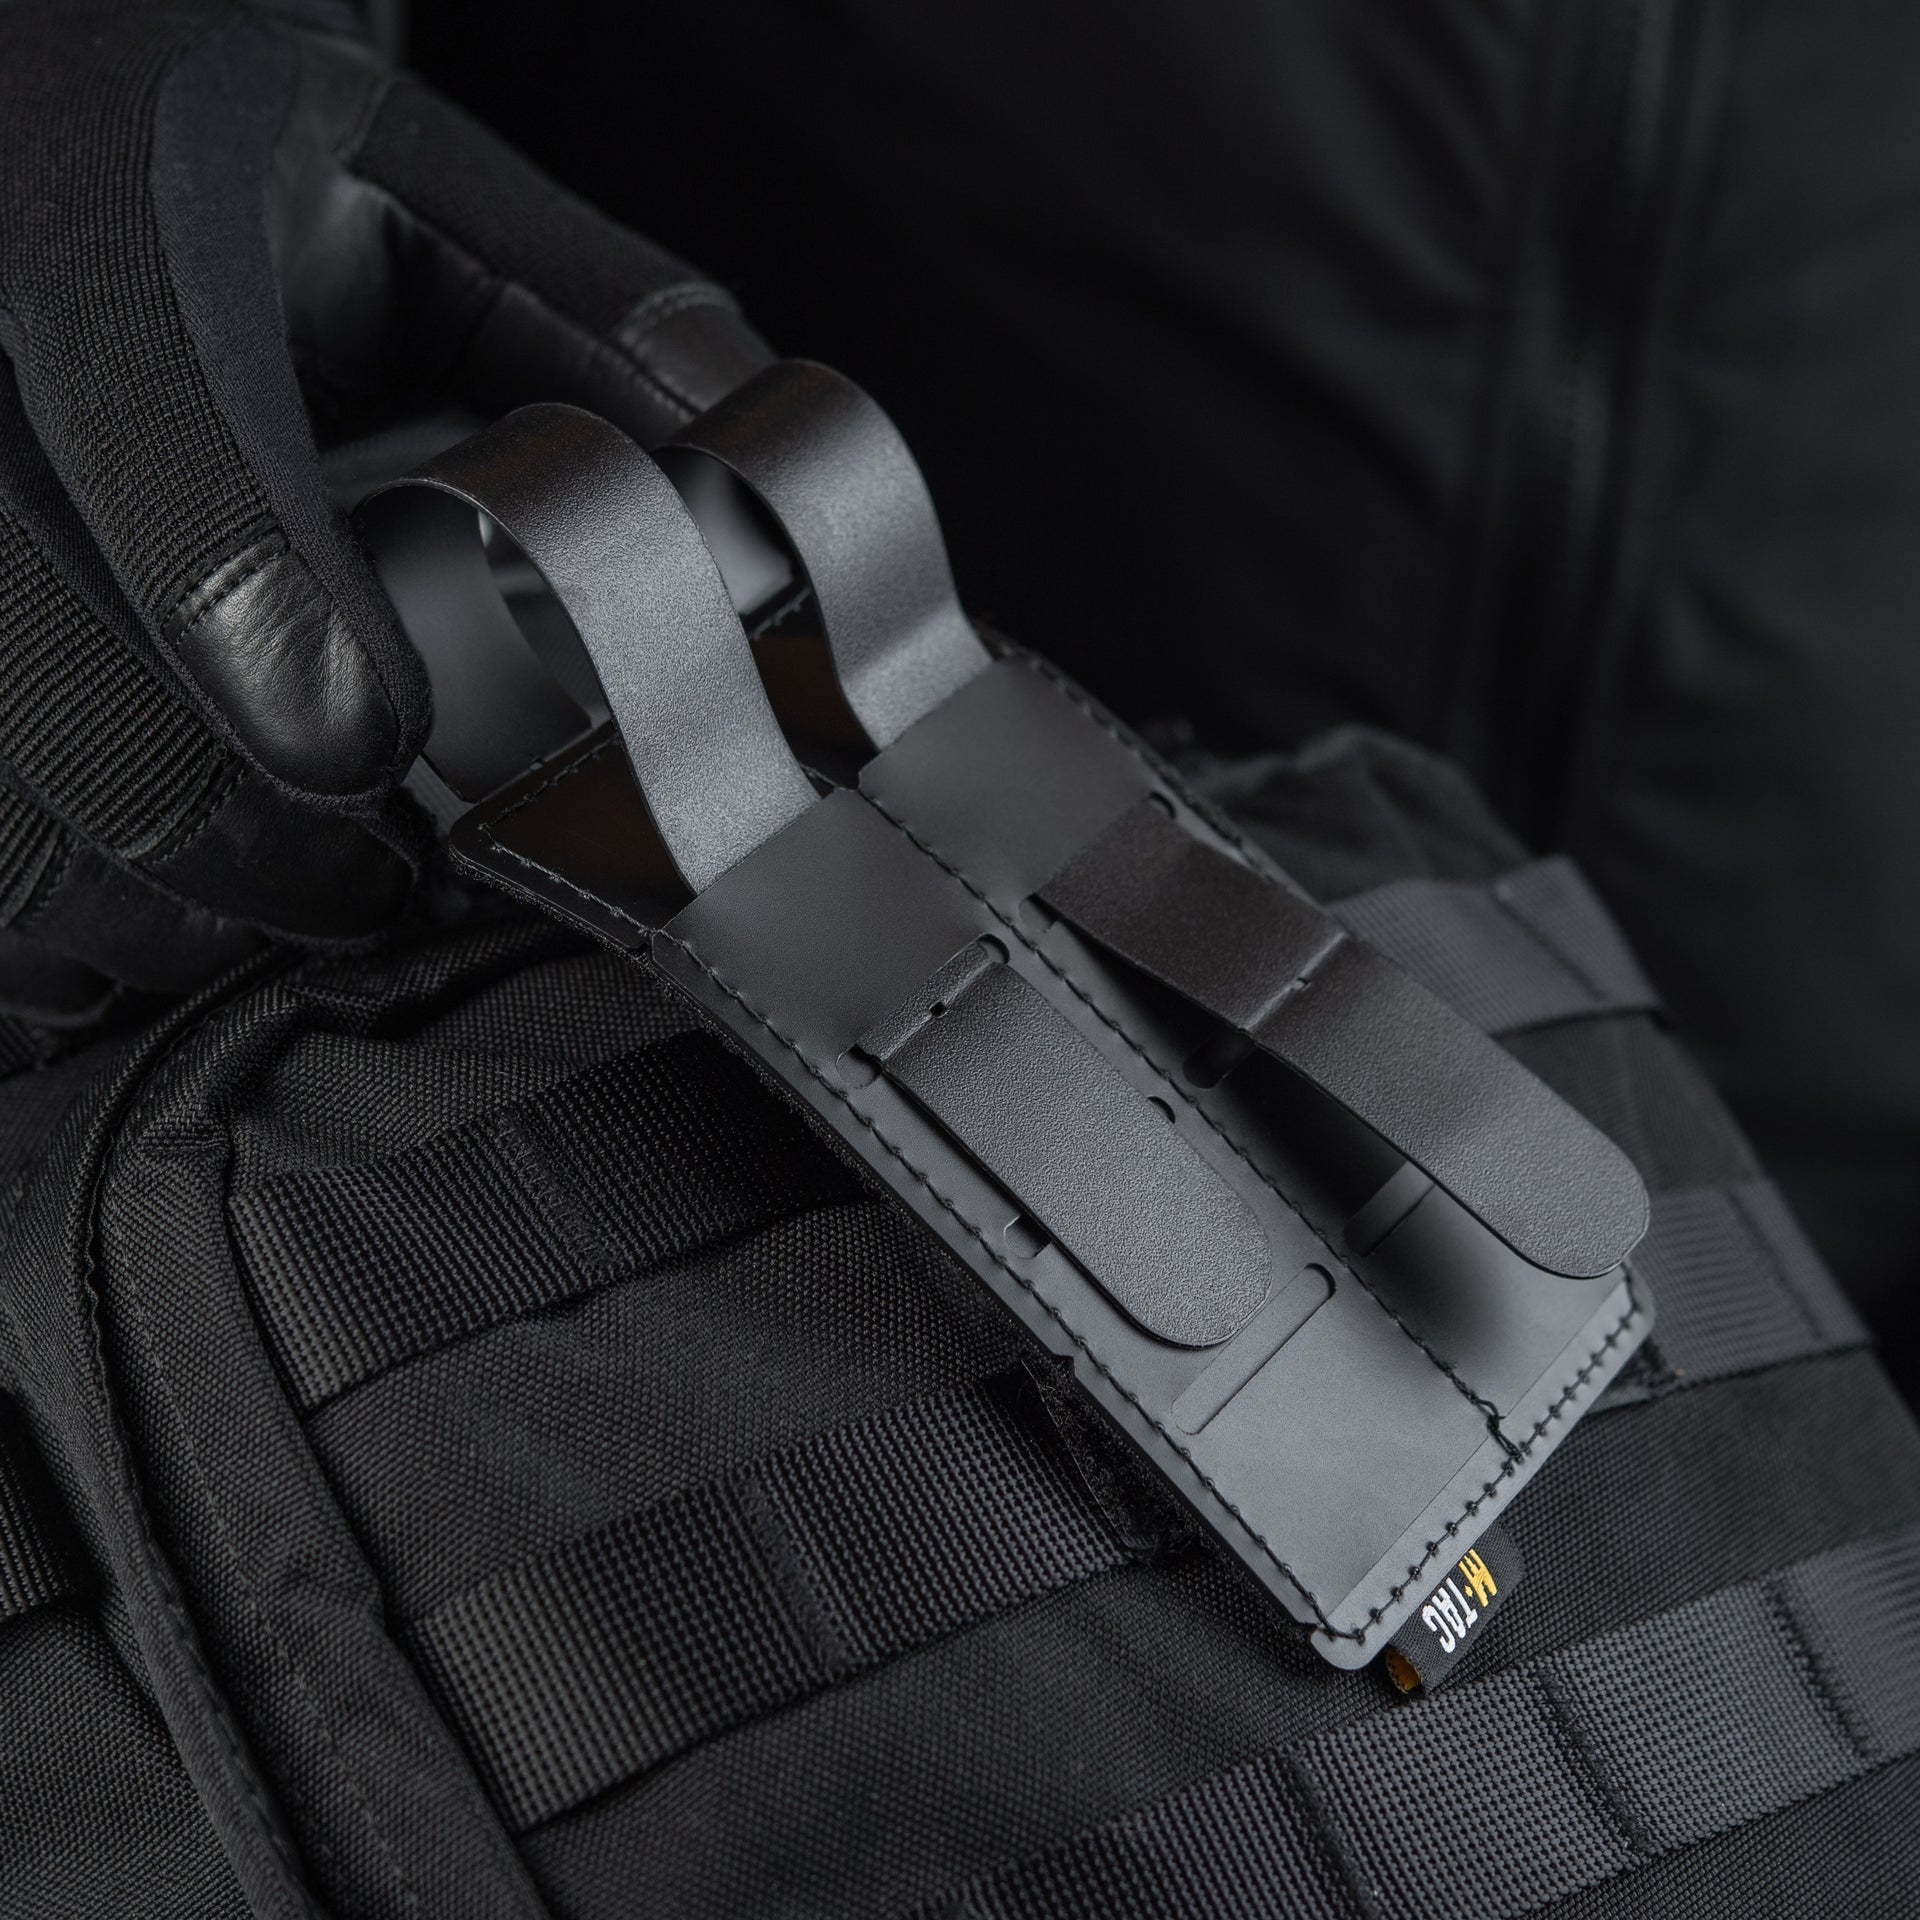 MOLLE pack organizer - hook loop attachment